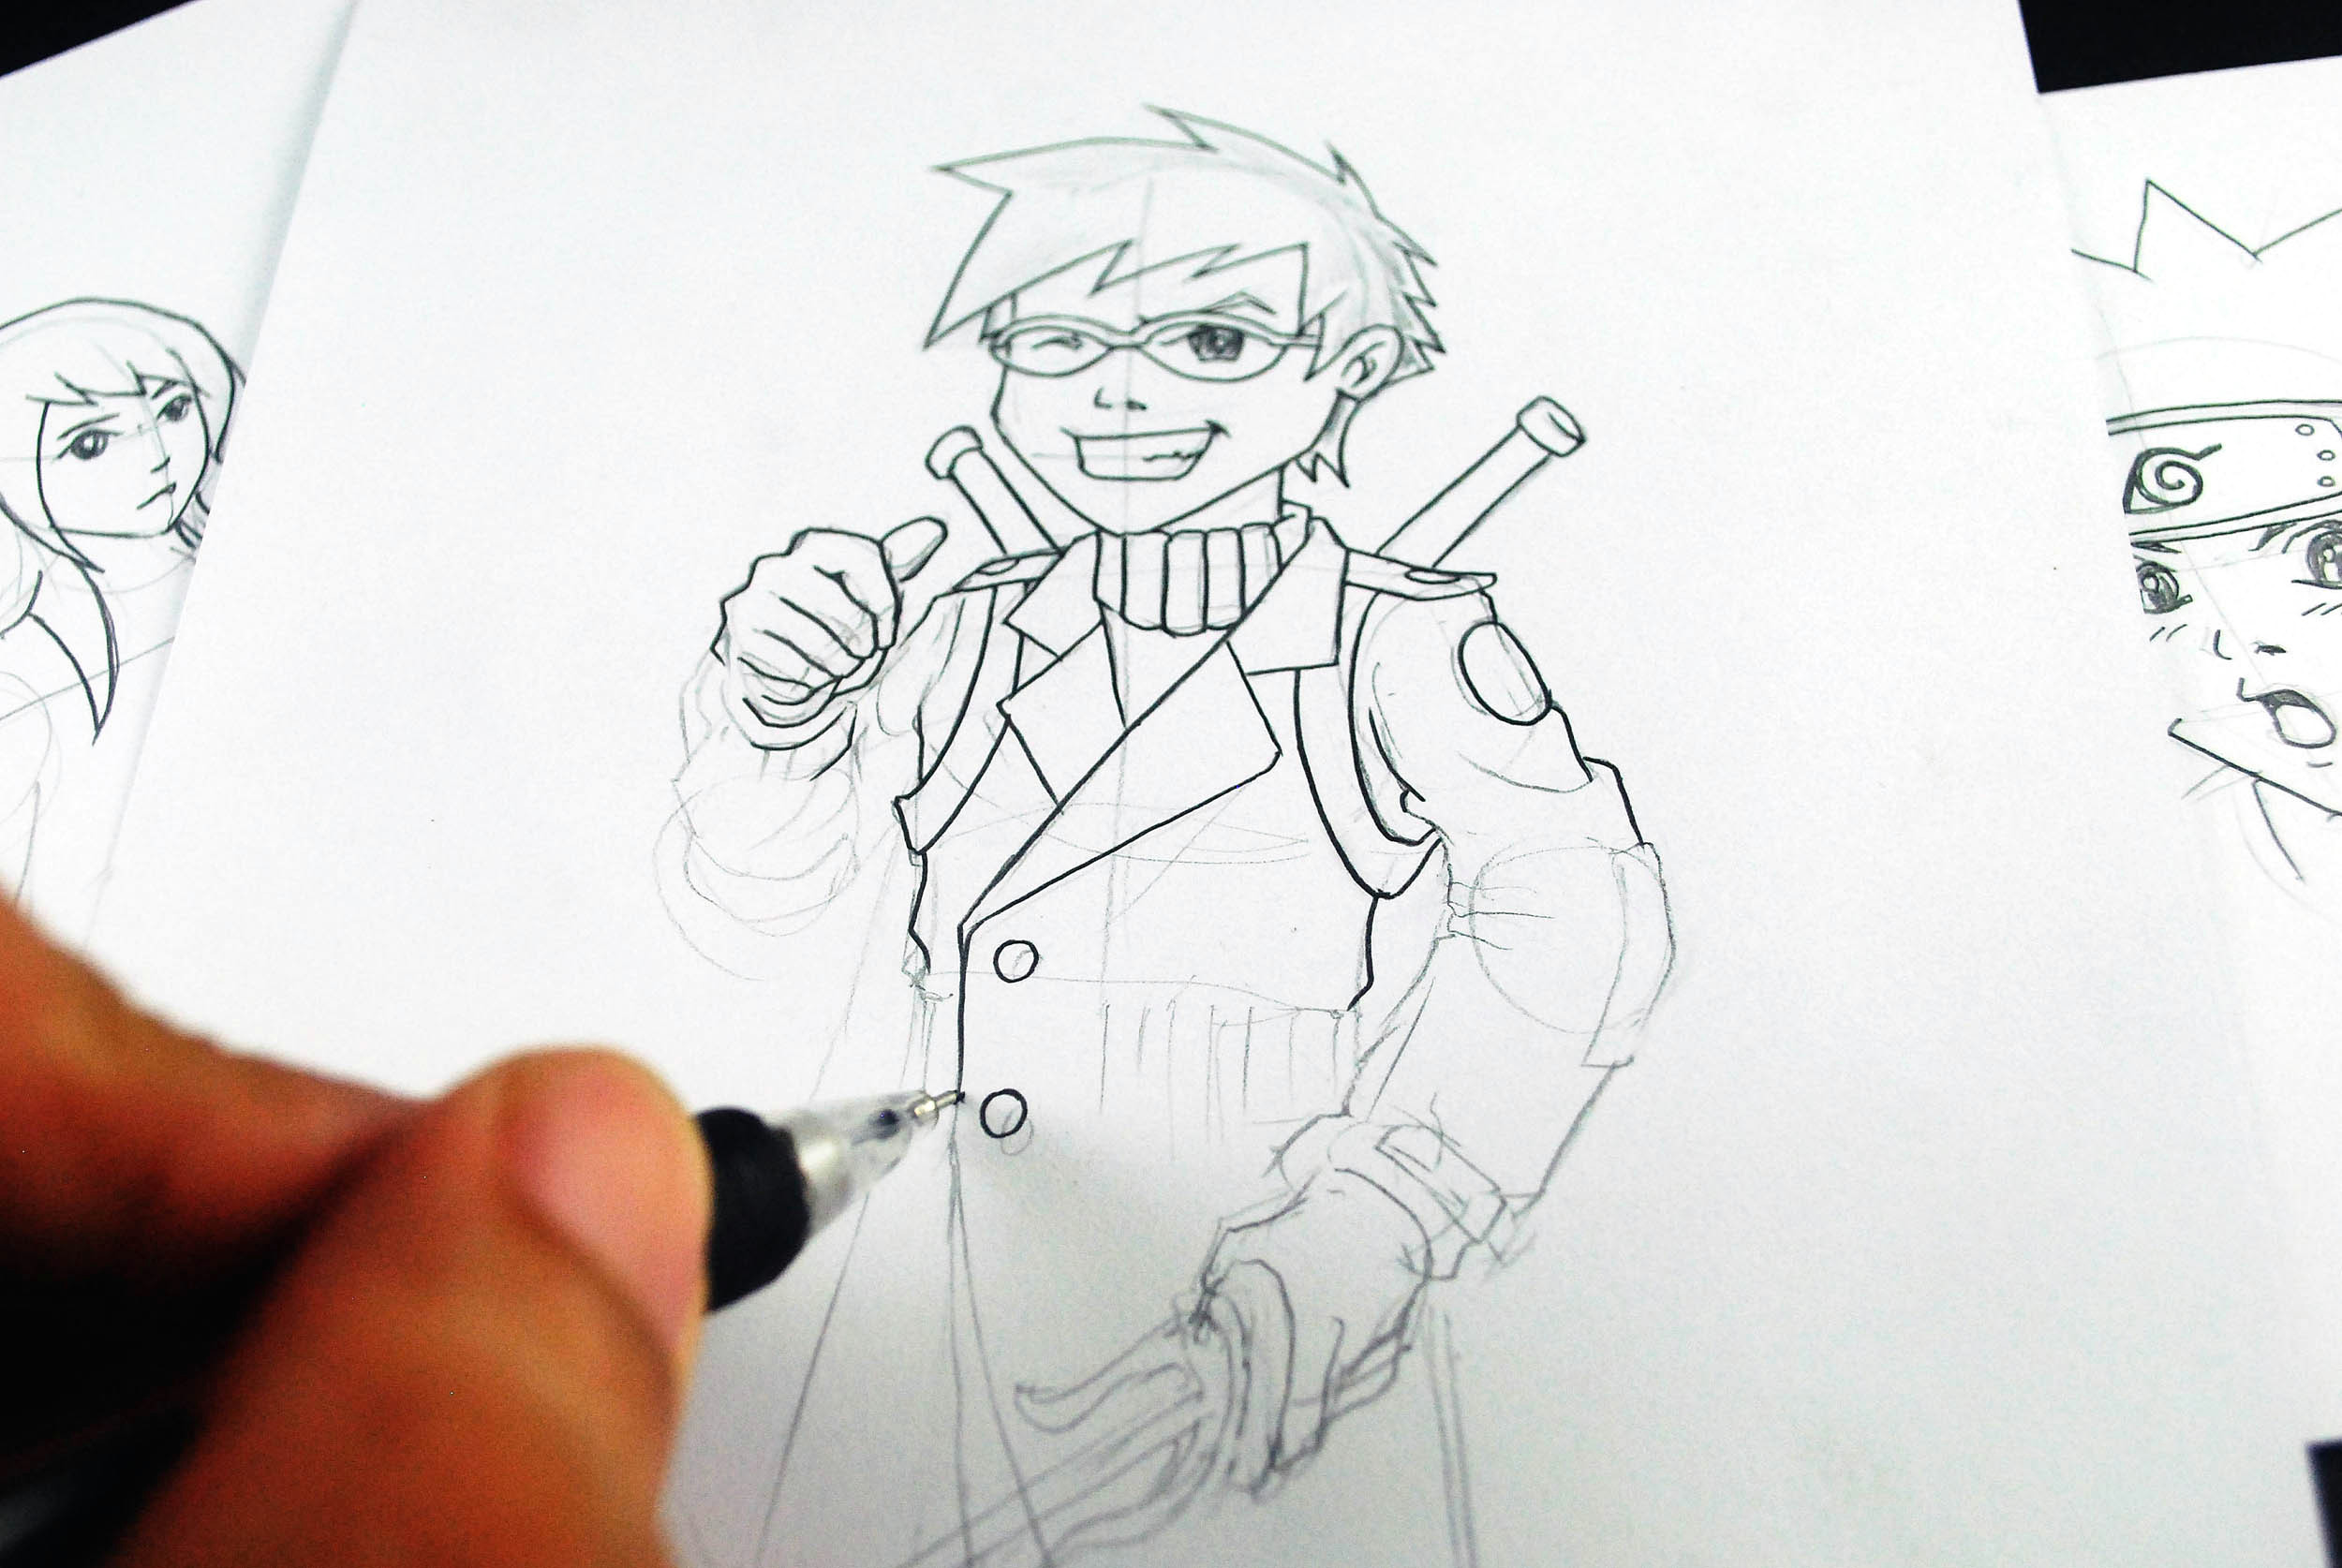 Best Way to Learn to Draw Anime How to Learn to Draw Manga and Develop Your Own Style 5 Steps